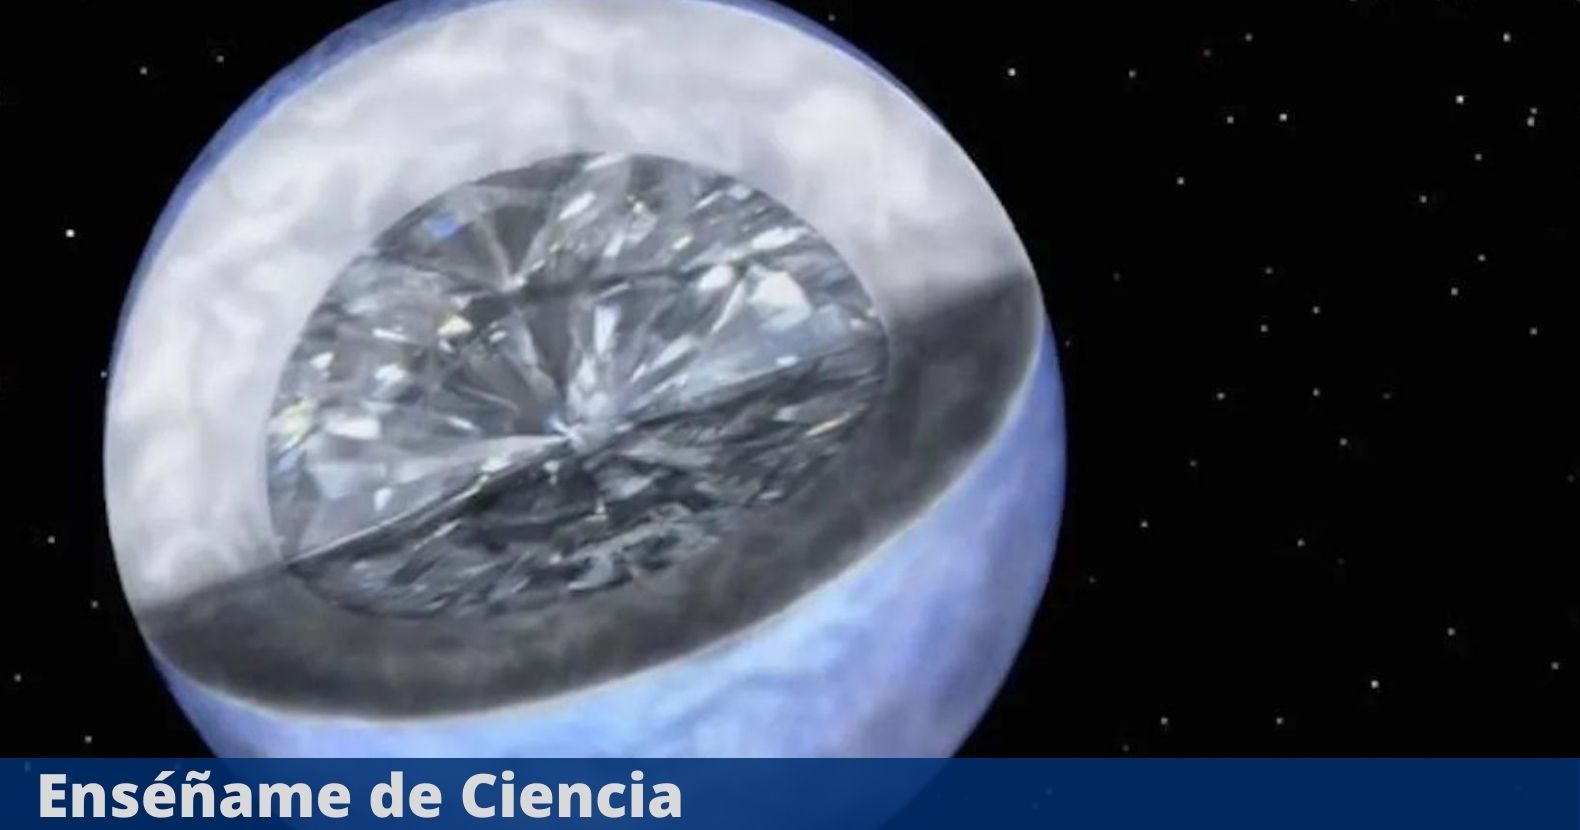 This is Lucy, the largest diamond in the universe exceeding the size of the Moon – Enseñame de Ciencia